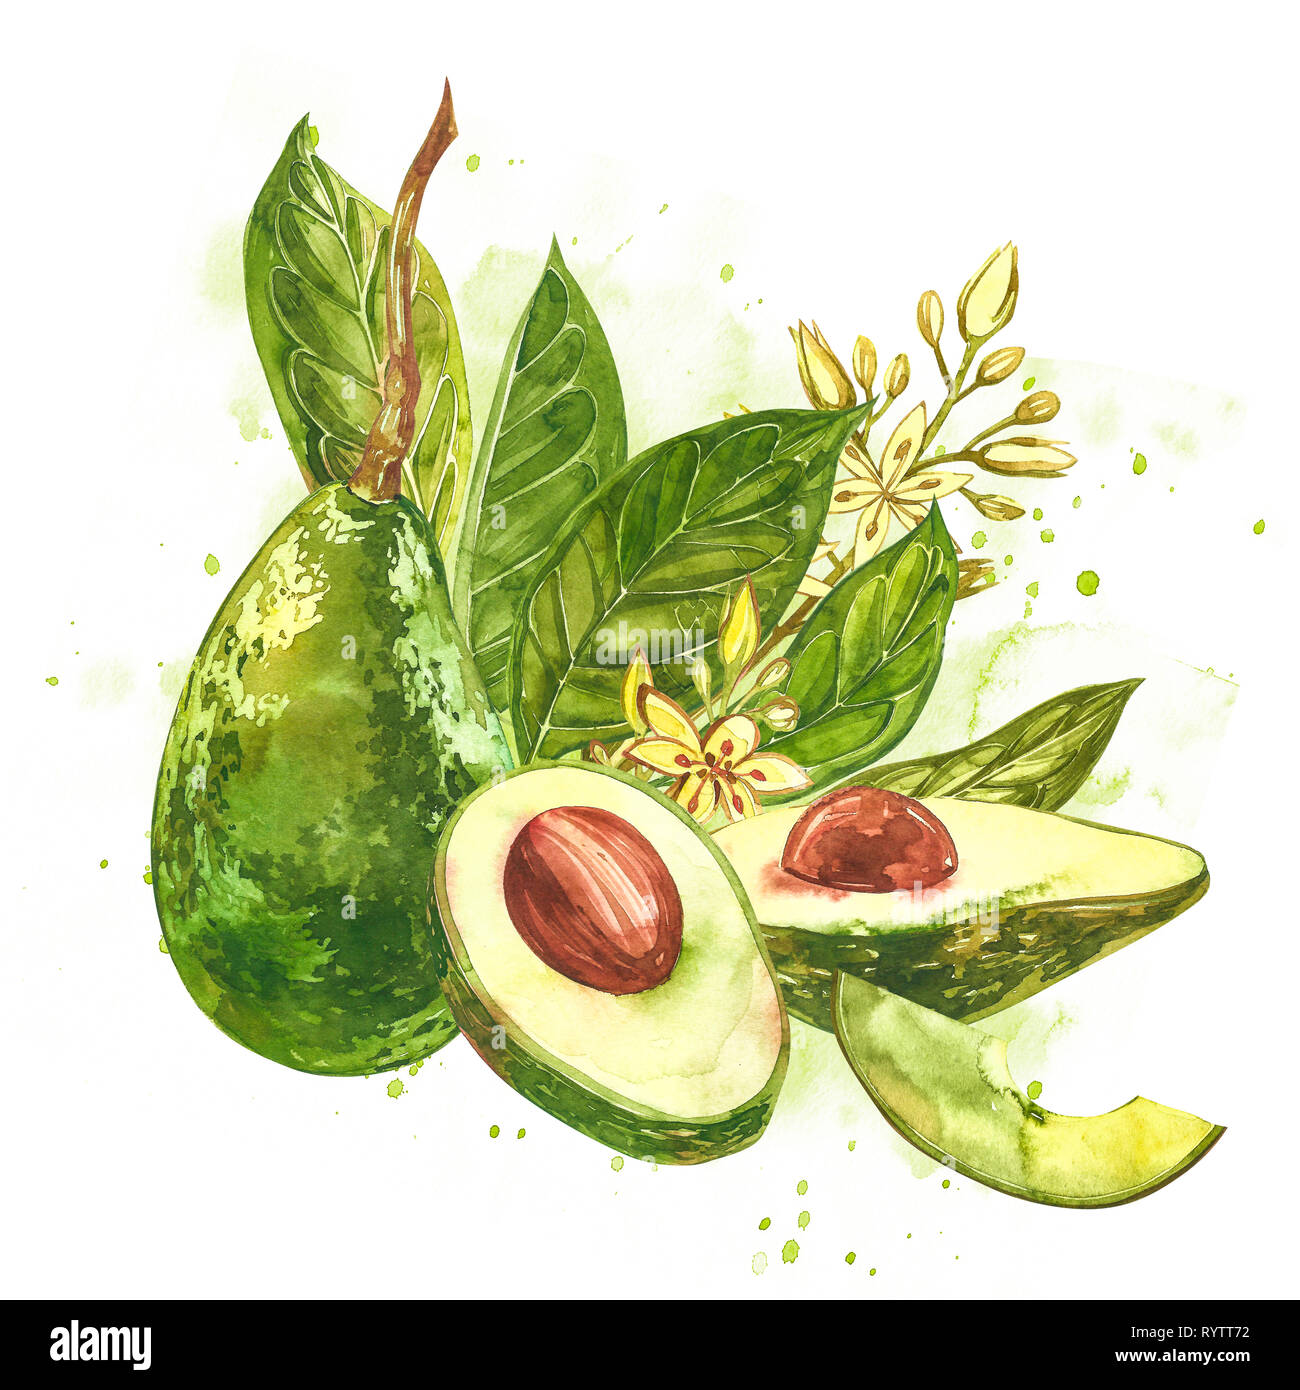 Avocado watercolor hand draw illustration isolated on white background. Stock Photo